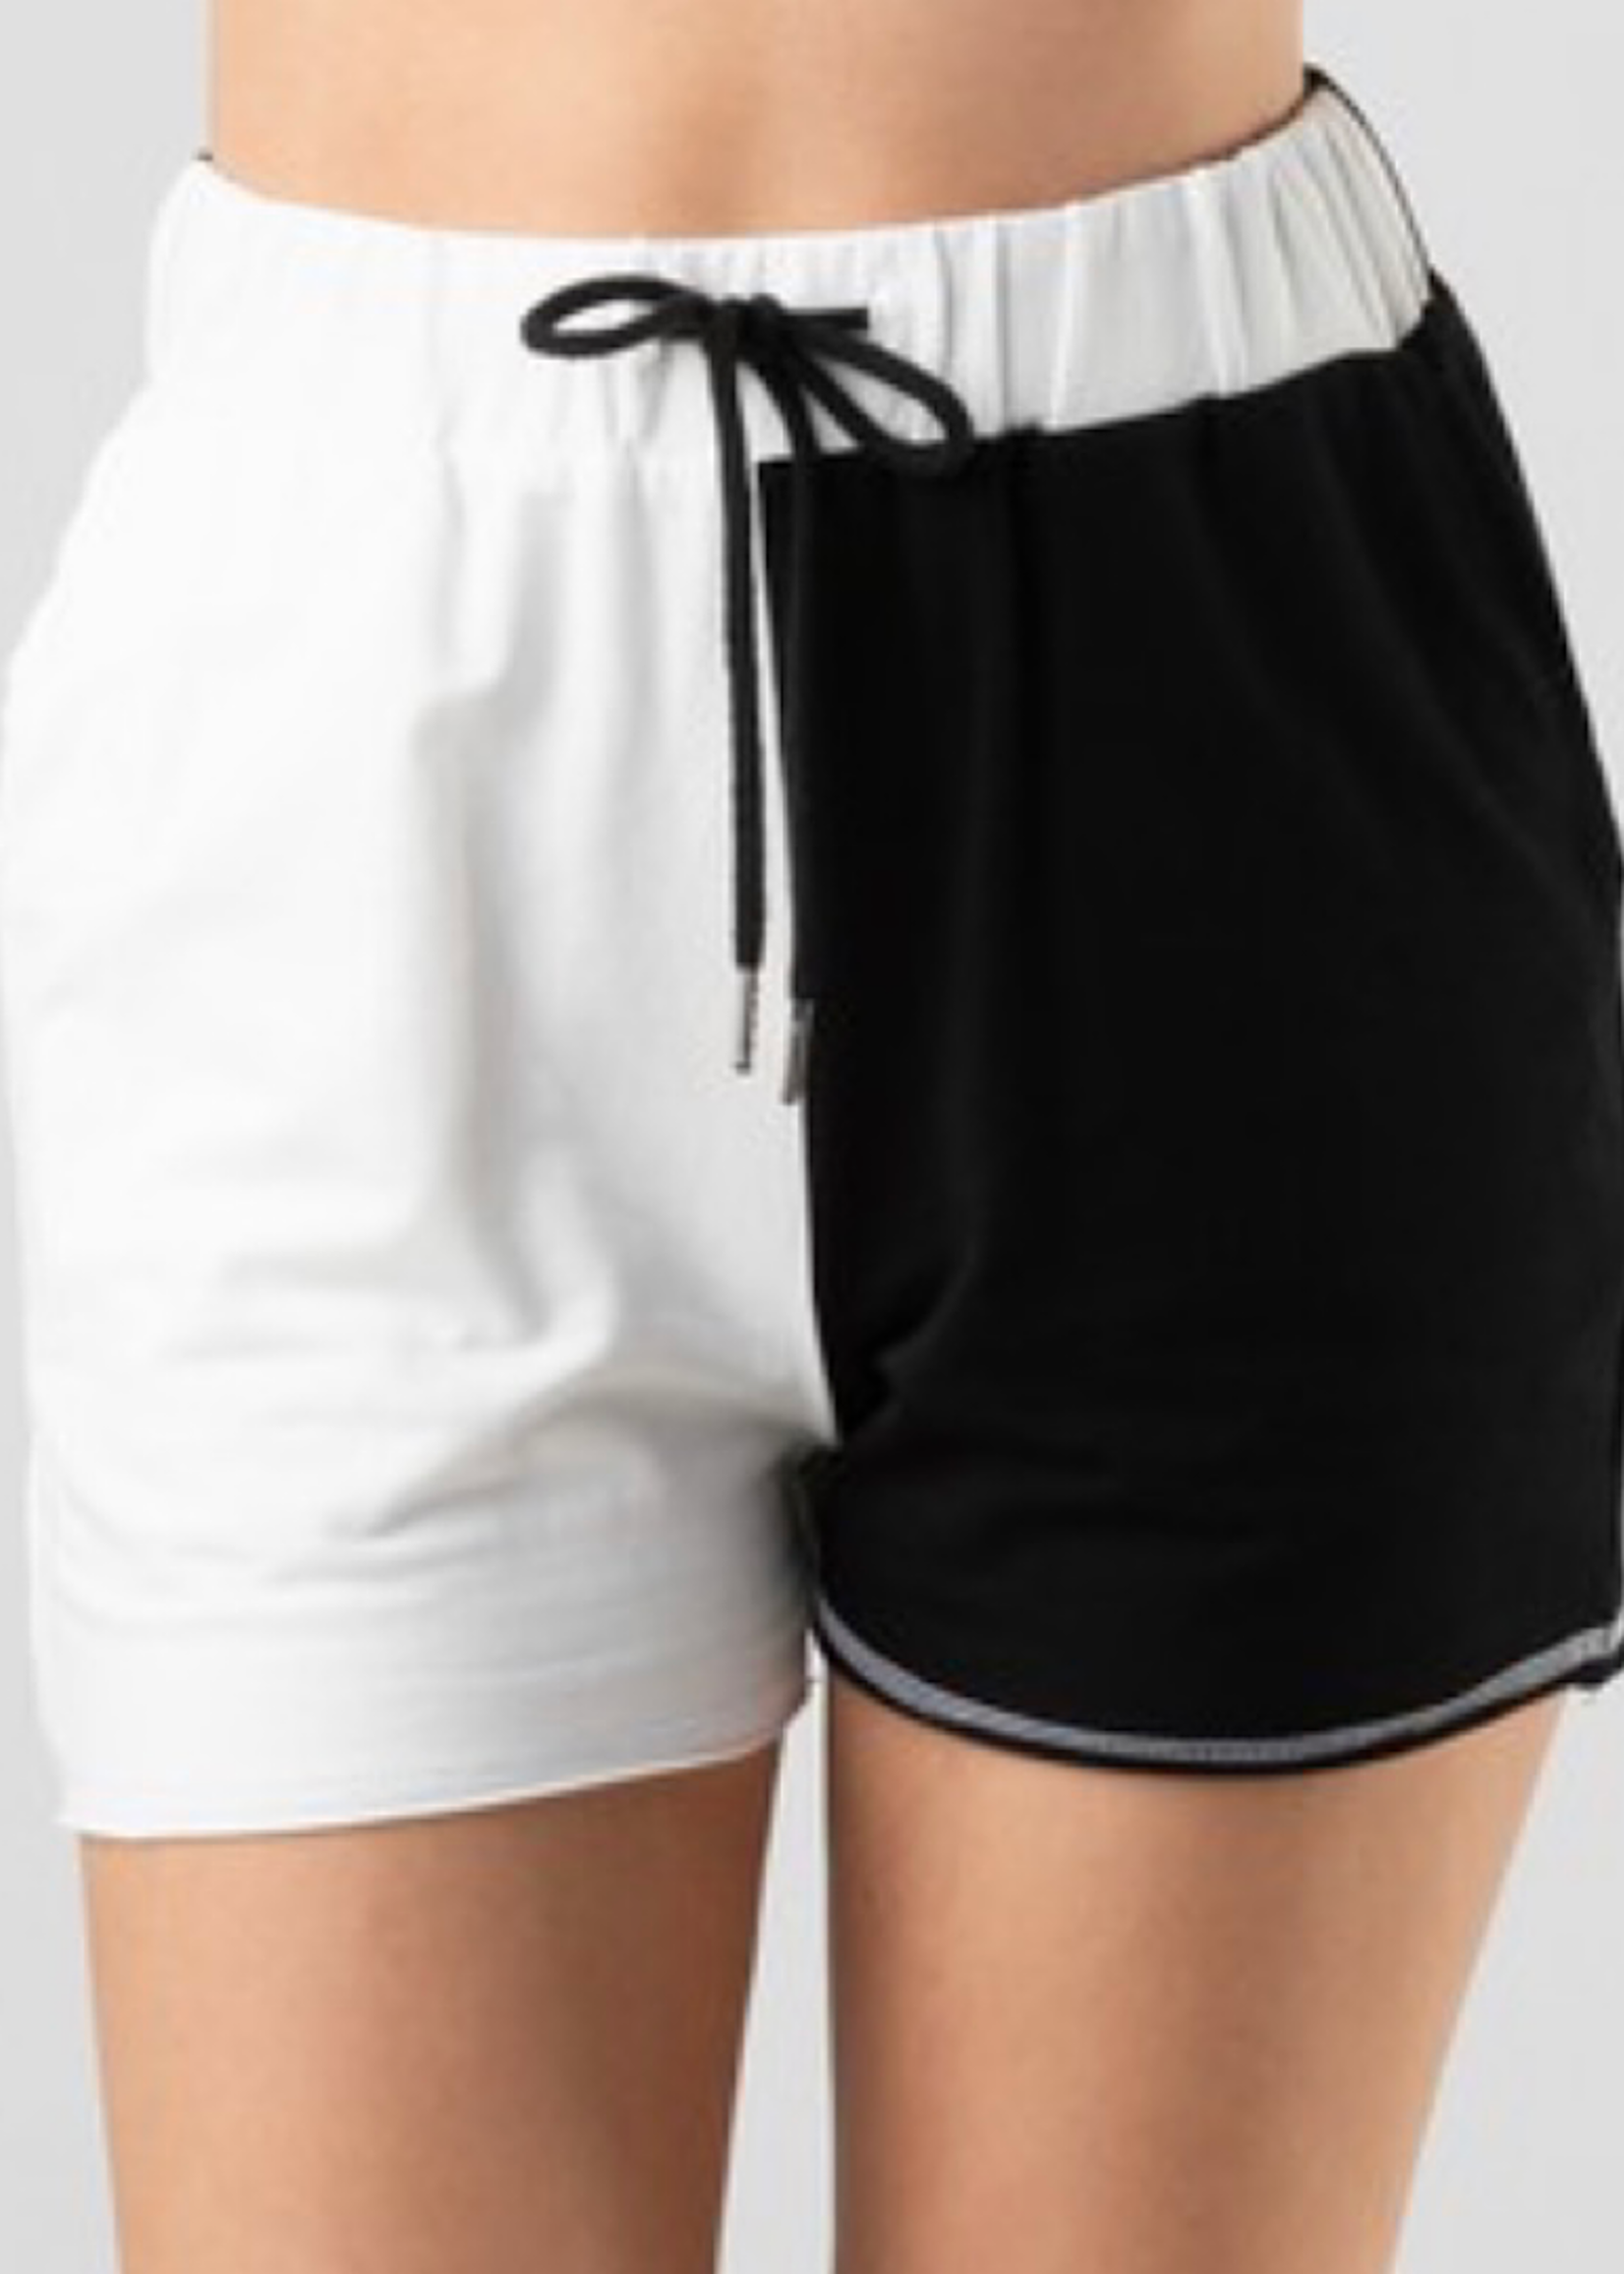 Black and White Color Block Shorts